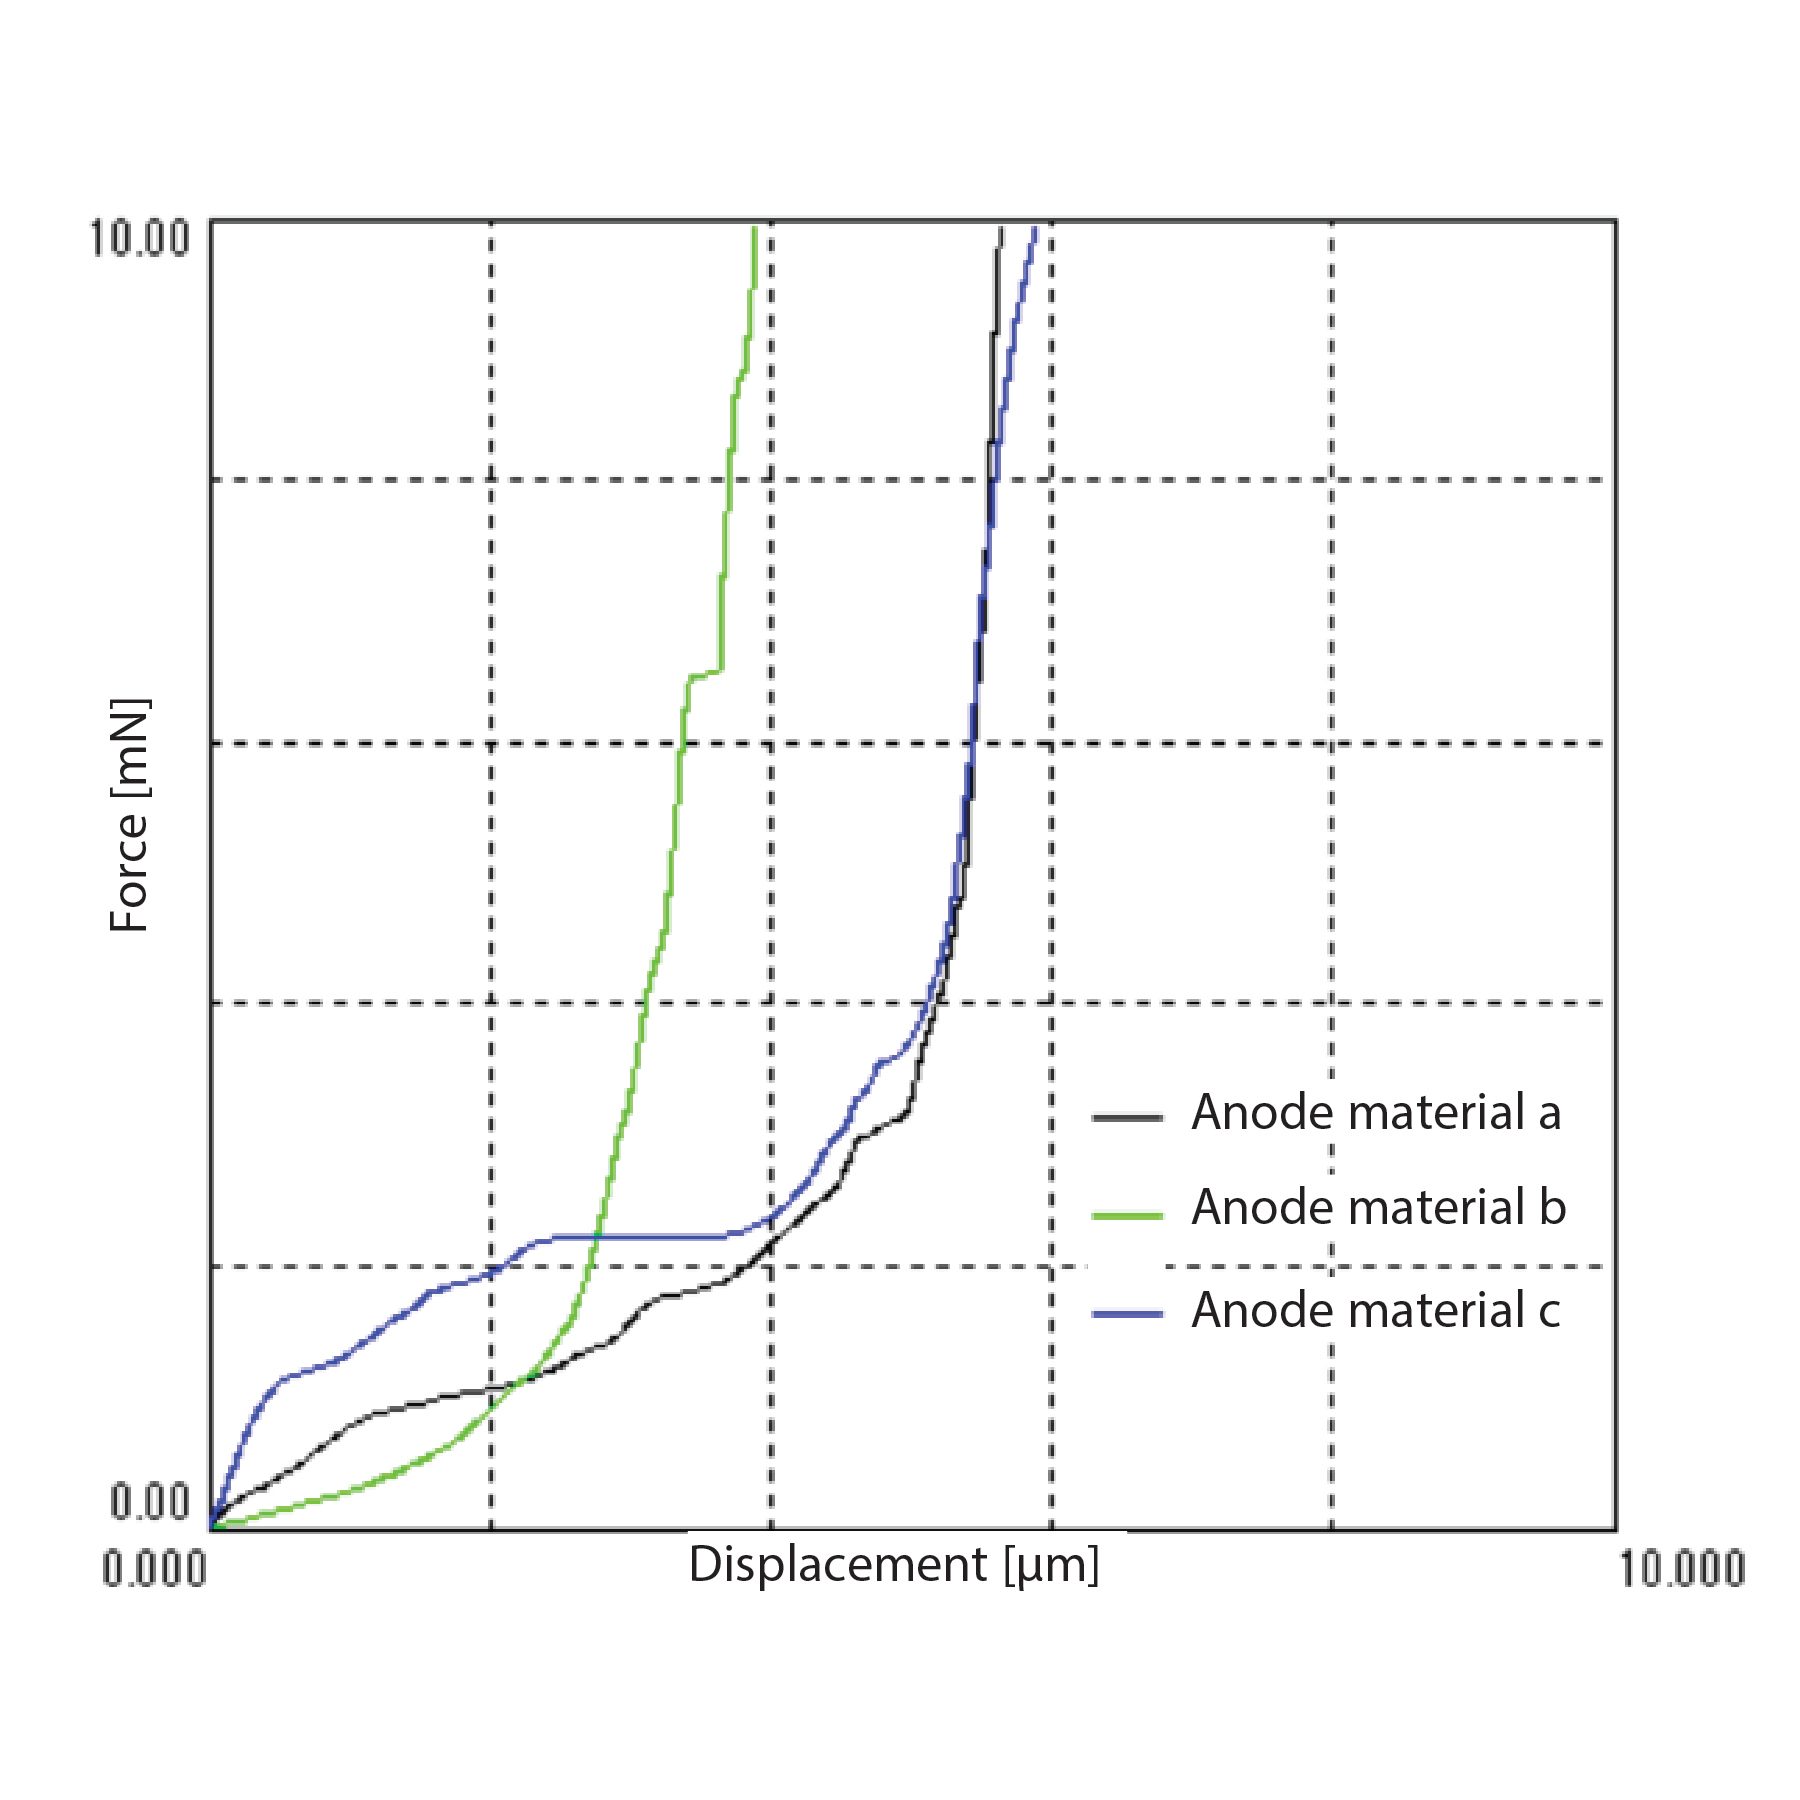 Figure 7: Average force-displacement curve comparing three graphite anode materials